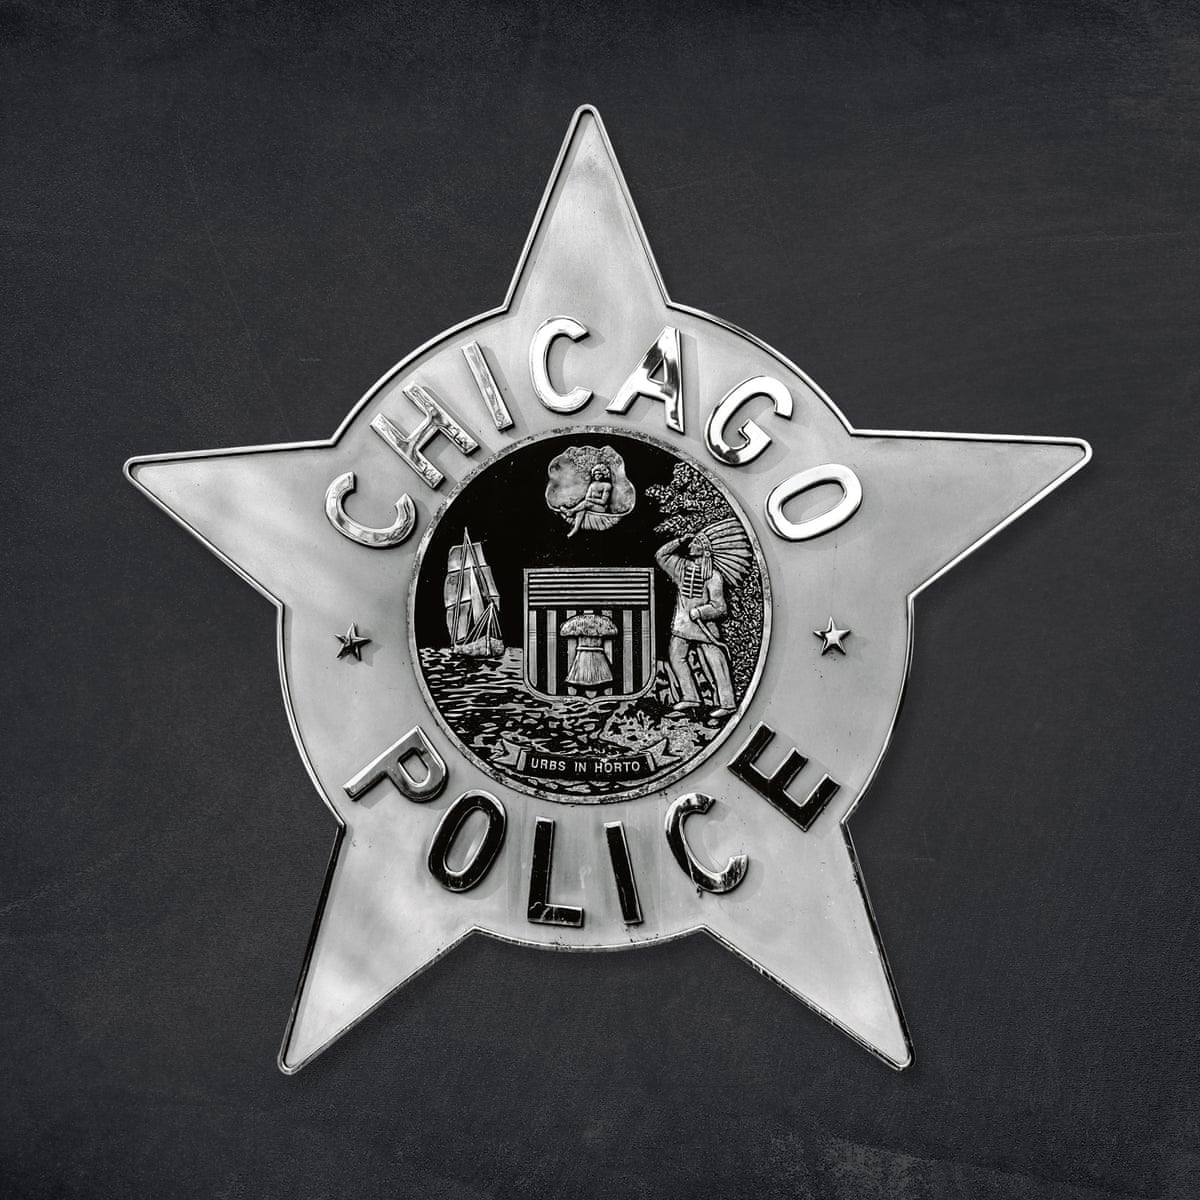 Chicago Police Wallpapers